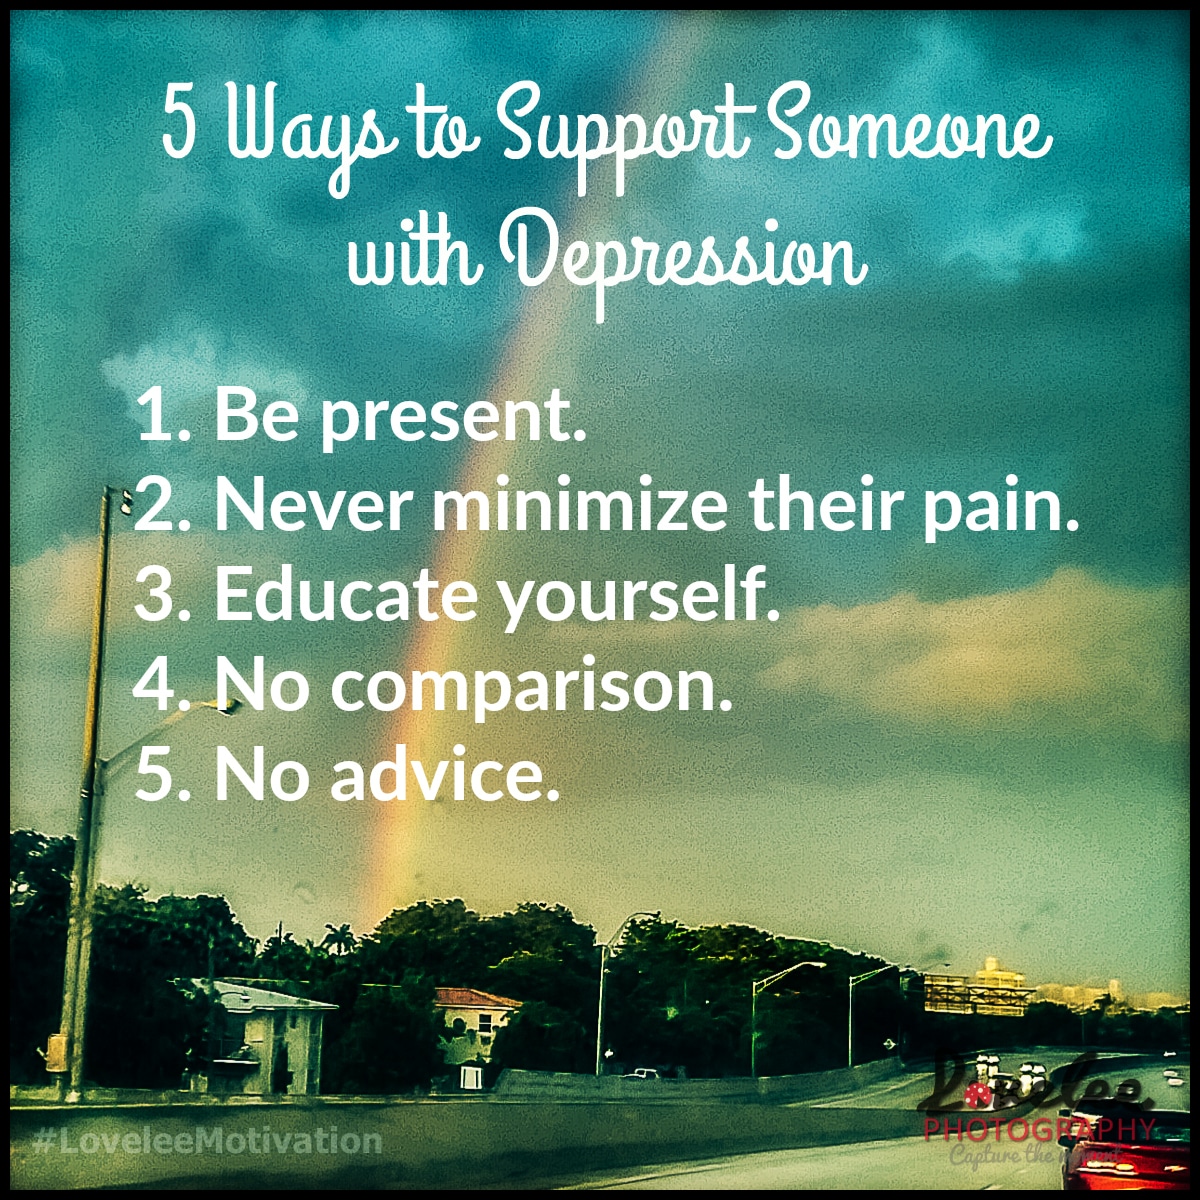 Lovelee Motivation: 5 Ways to Support Someone with Depression